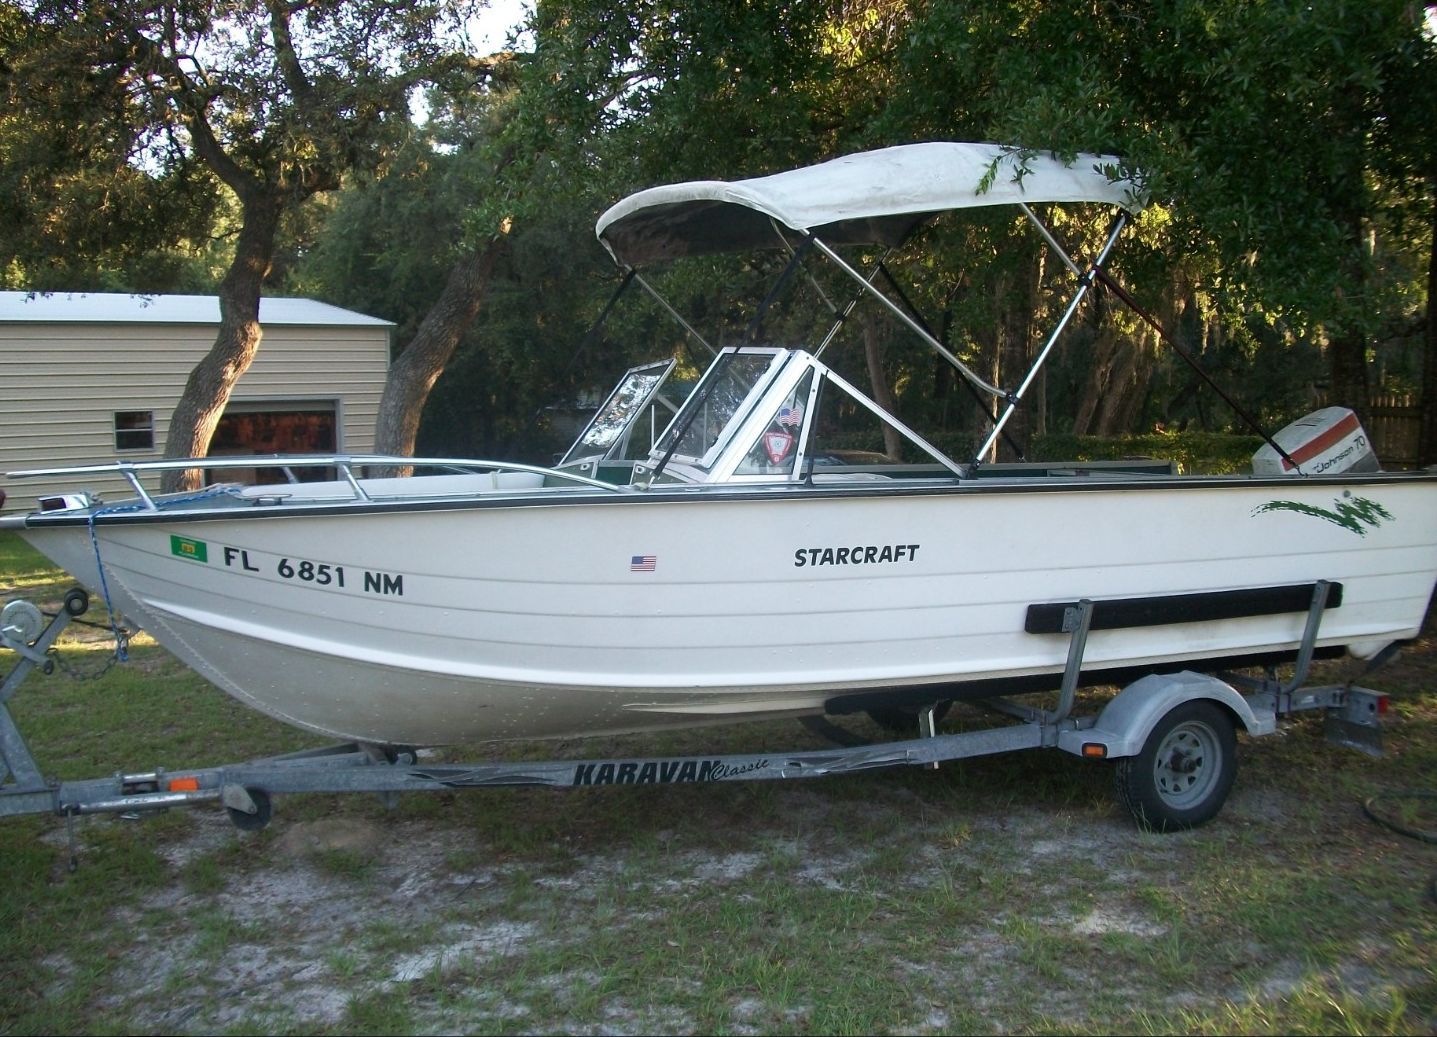 Starcraft Ss 1977 for sale for $3,395 - Boats-from-USA.com